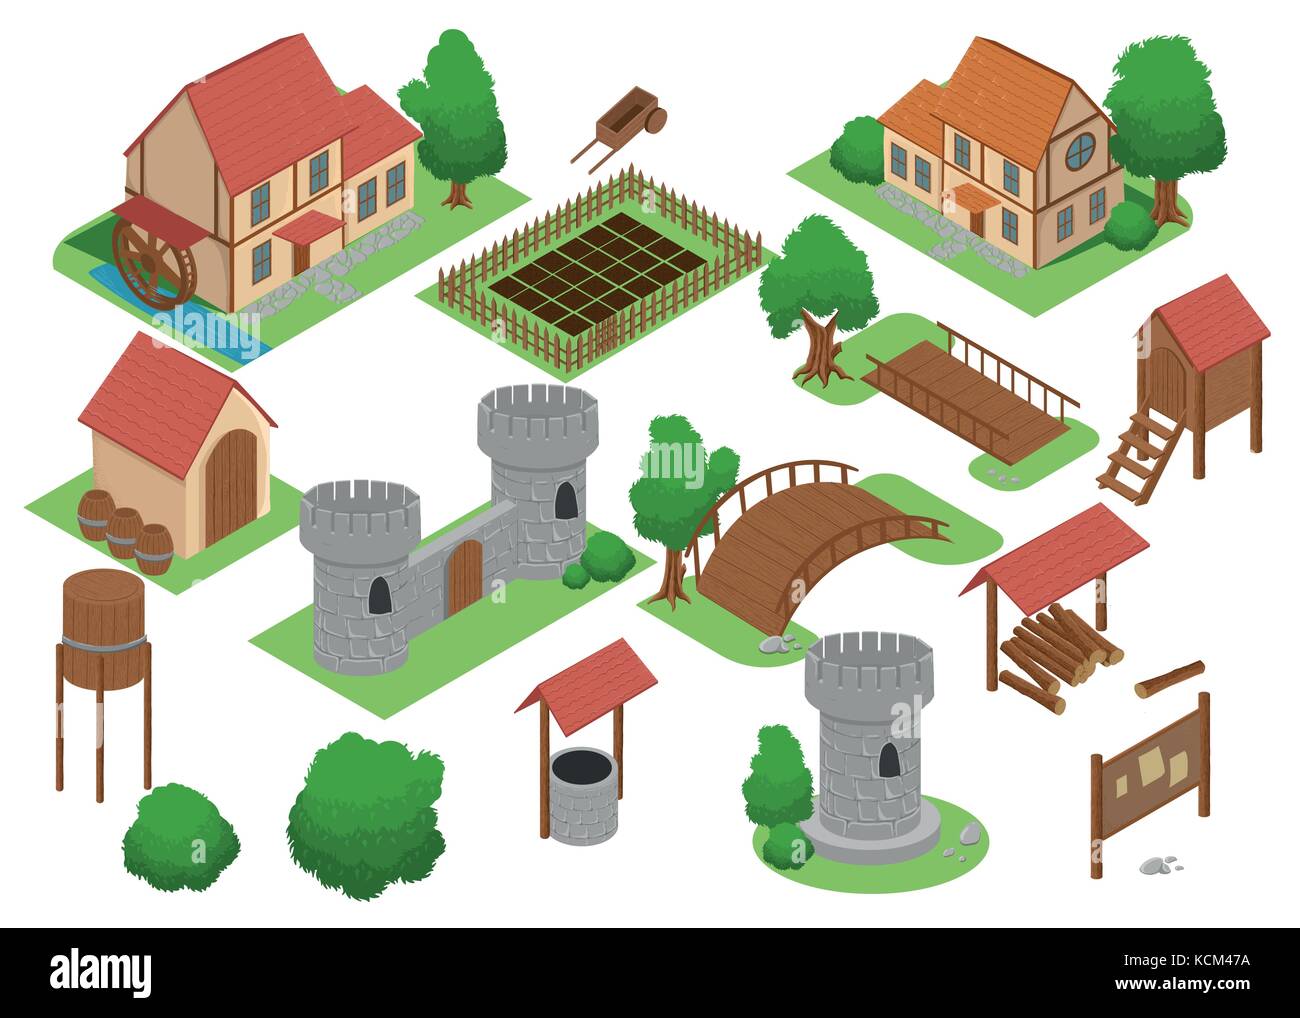 Medieval house Tile Online Strategic android video Game Insight. Development map element Isometric Flat Medieval 3D Buildings and Mill Explore Vector  Stock Vector